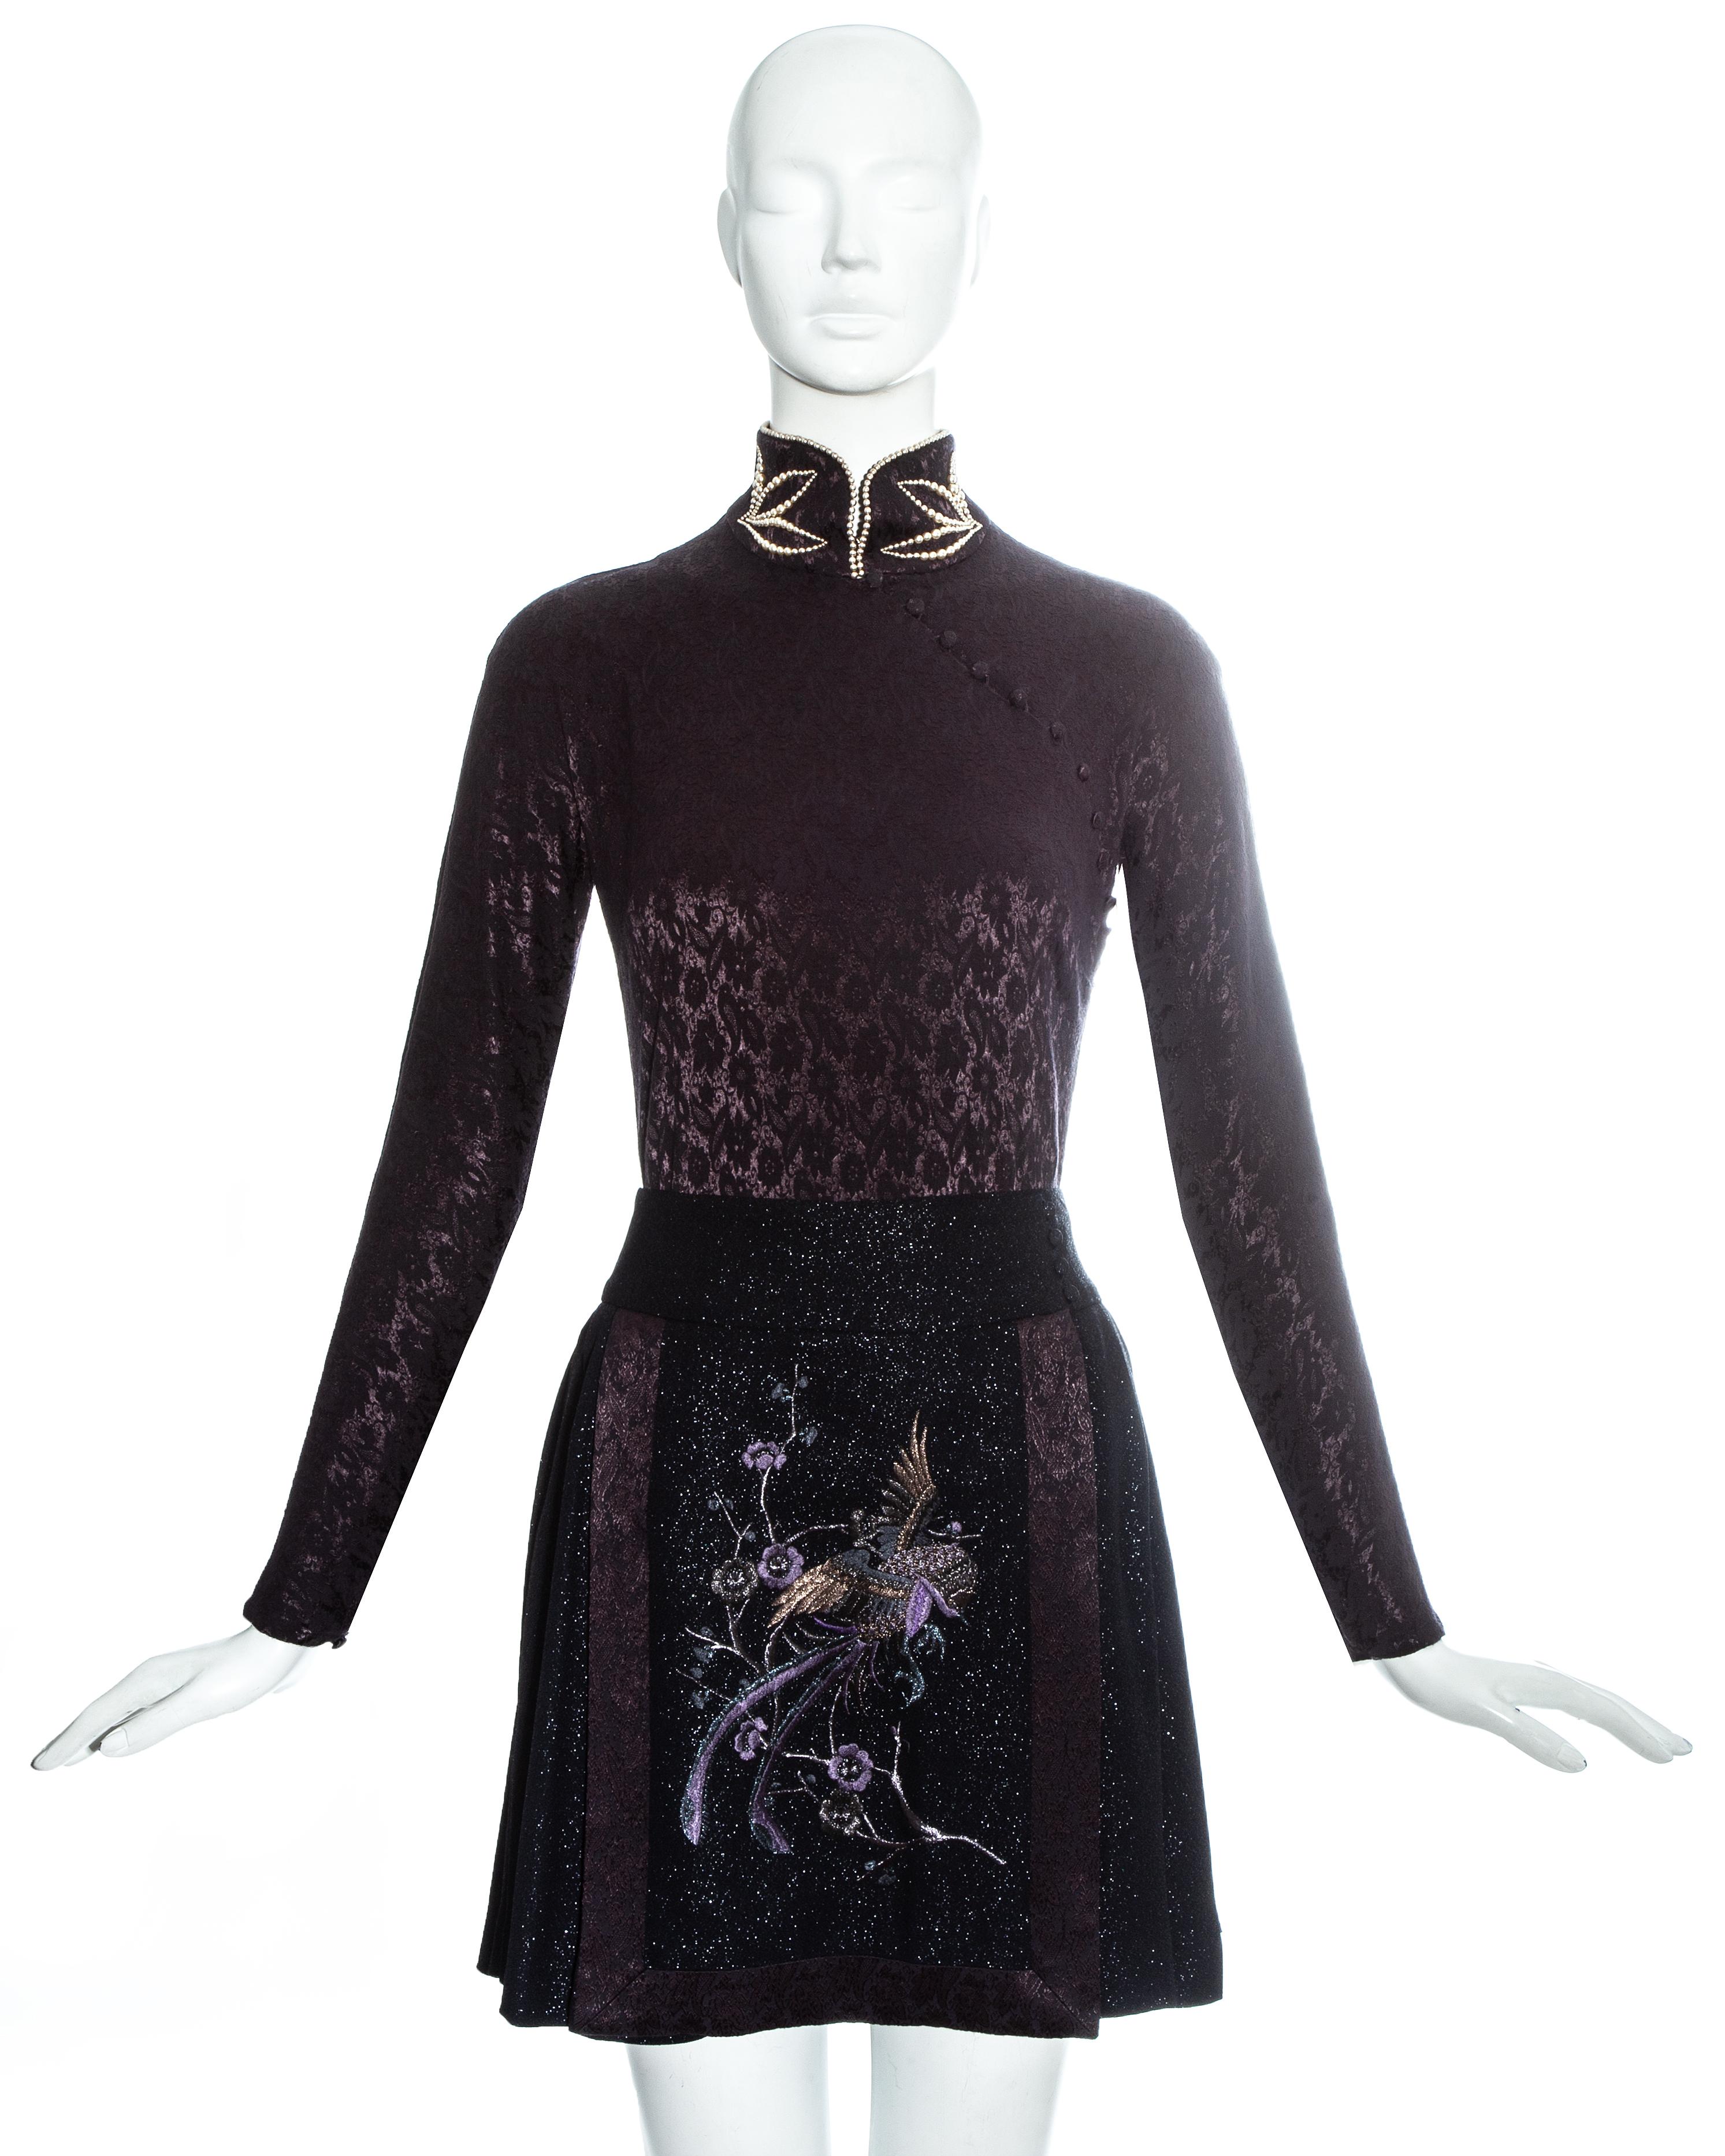 Christian Dior by John Galliano, plum jacquard satin cheongsam style bodysuit with fabric covered button fastenings and high neck with decorative faux pearls and hook and eye fastenings. Black lurex mini wrap skirt with matching plum jacquard satin